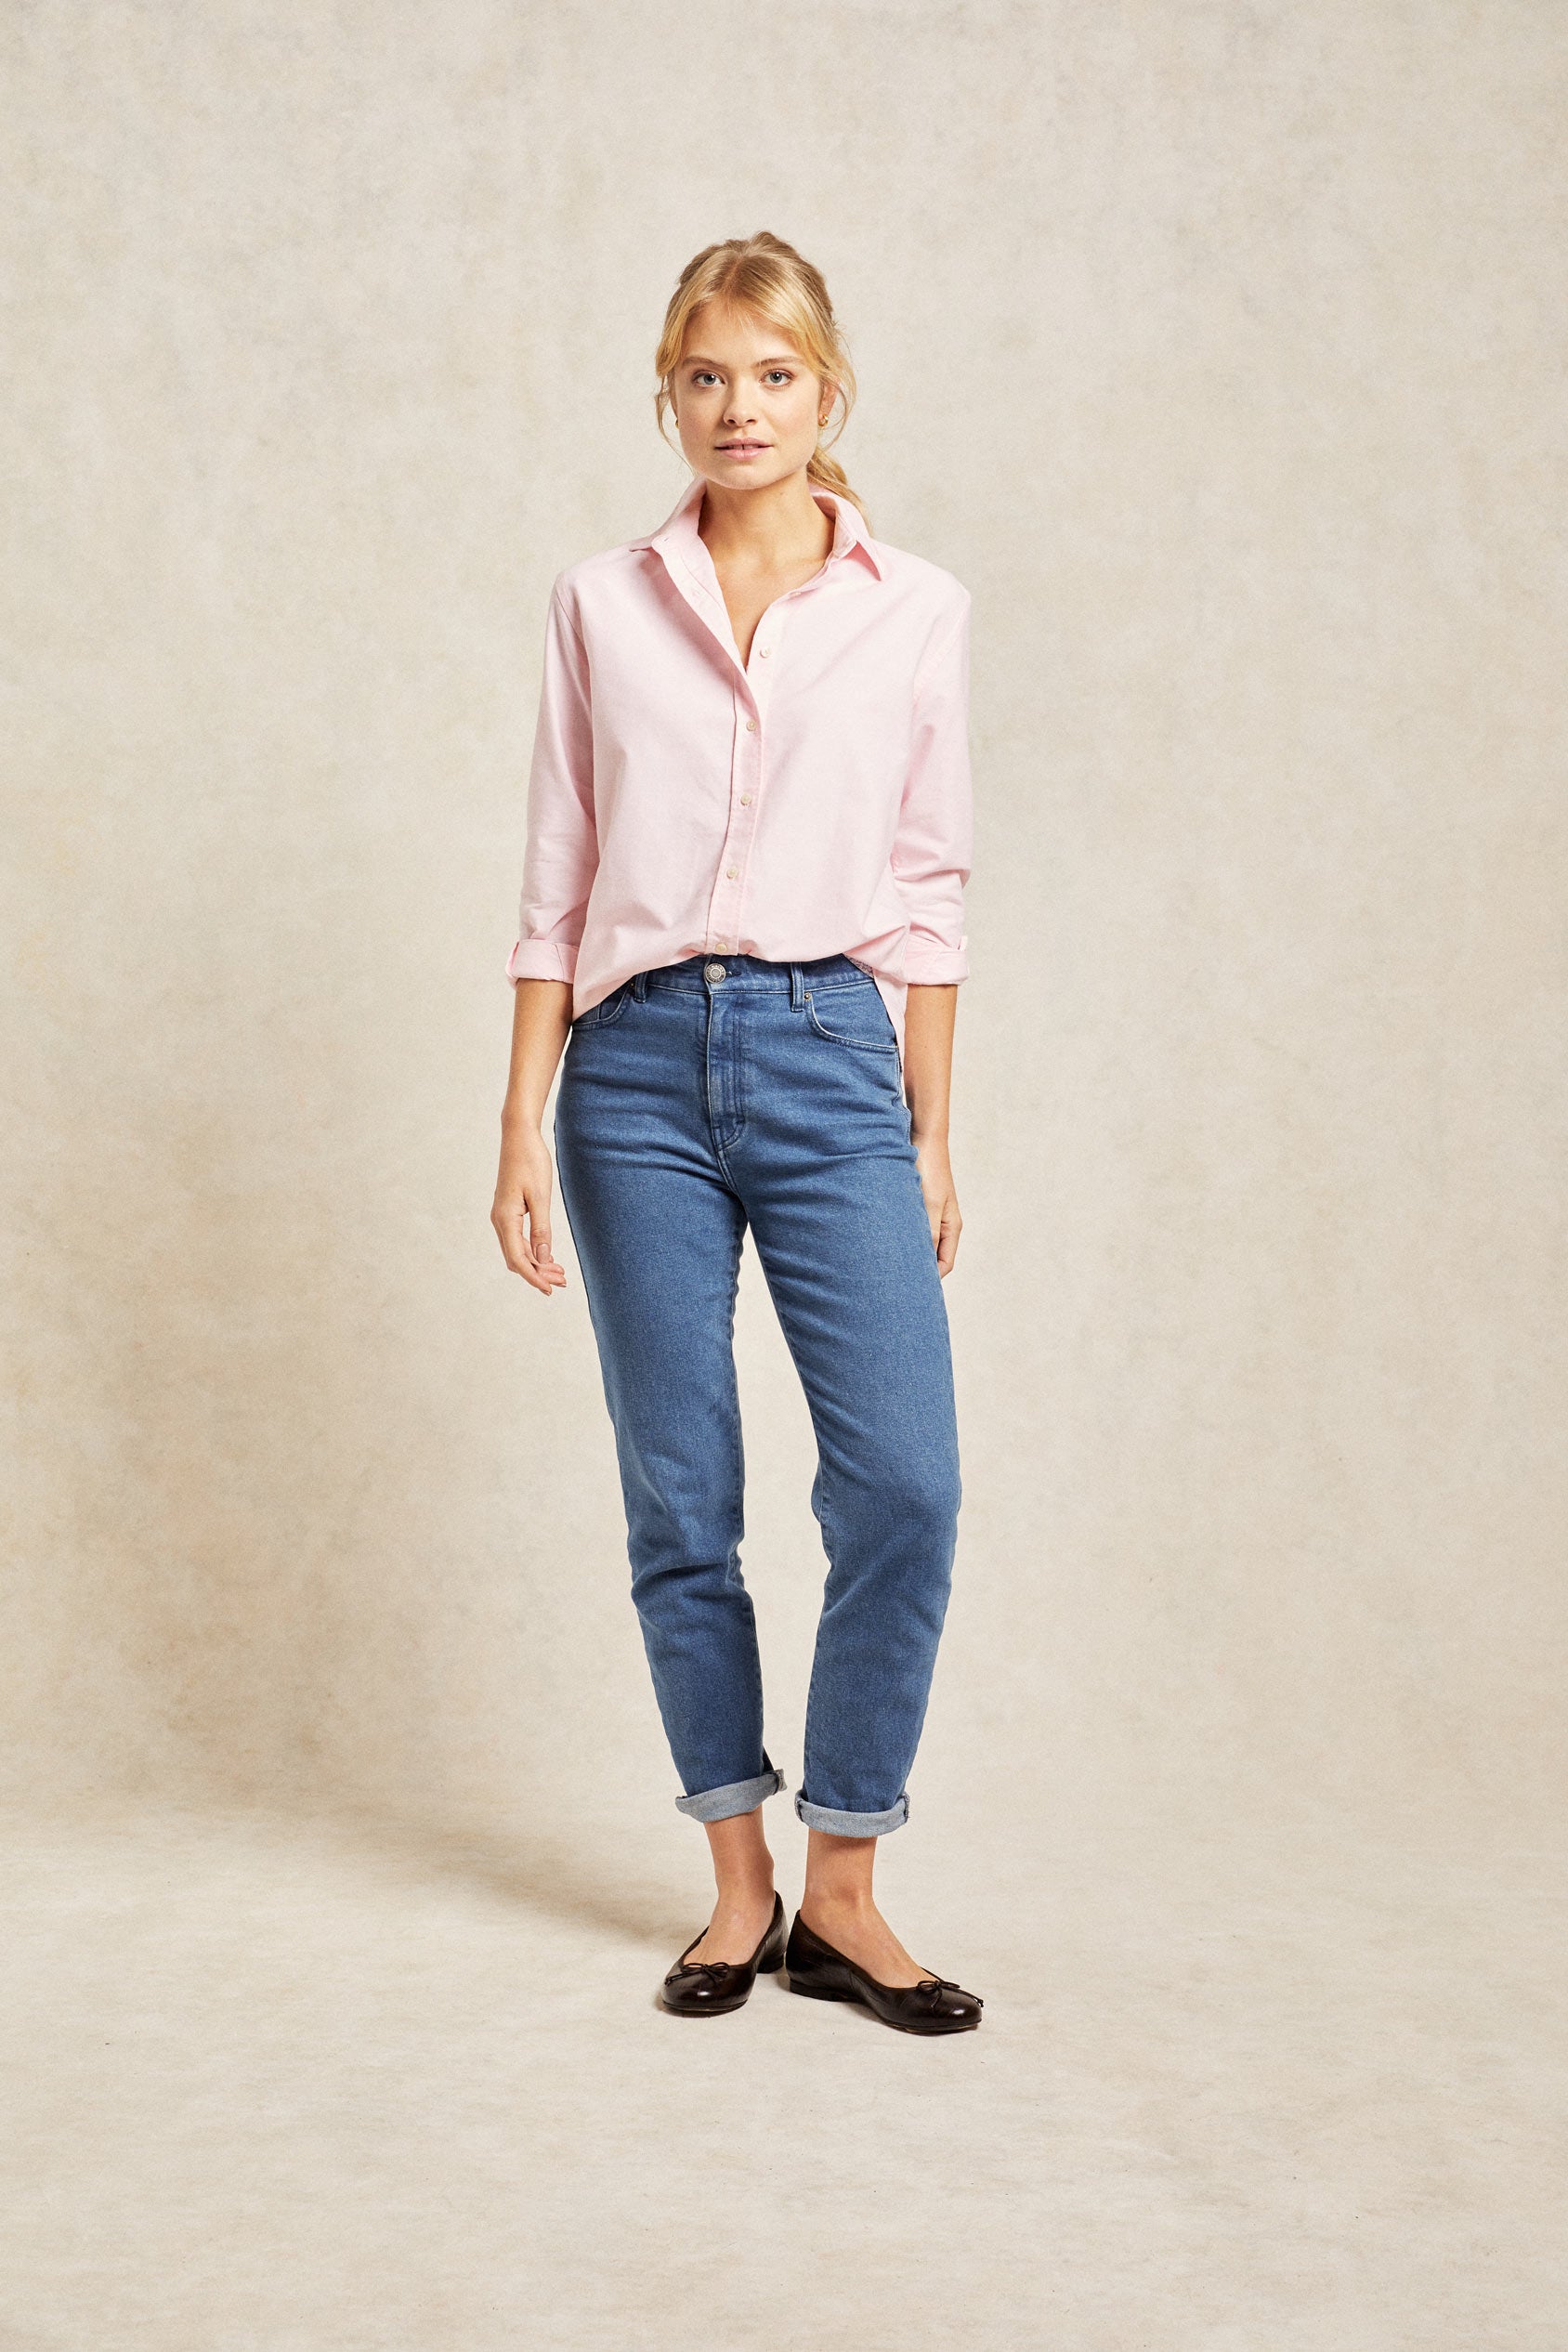 Classic collar boyfriend pink womens shirt in lighter weight oxford fabric. 100% Cotton. Cut from cotton to an effortless fit with a classic collar and button cuffs. Casual wear. Size XS, S, M, L, XL. Machine Wash. Made in Portugal.